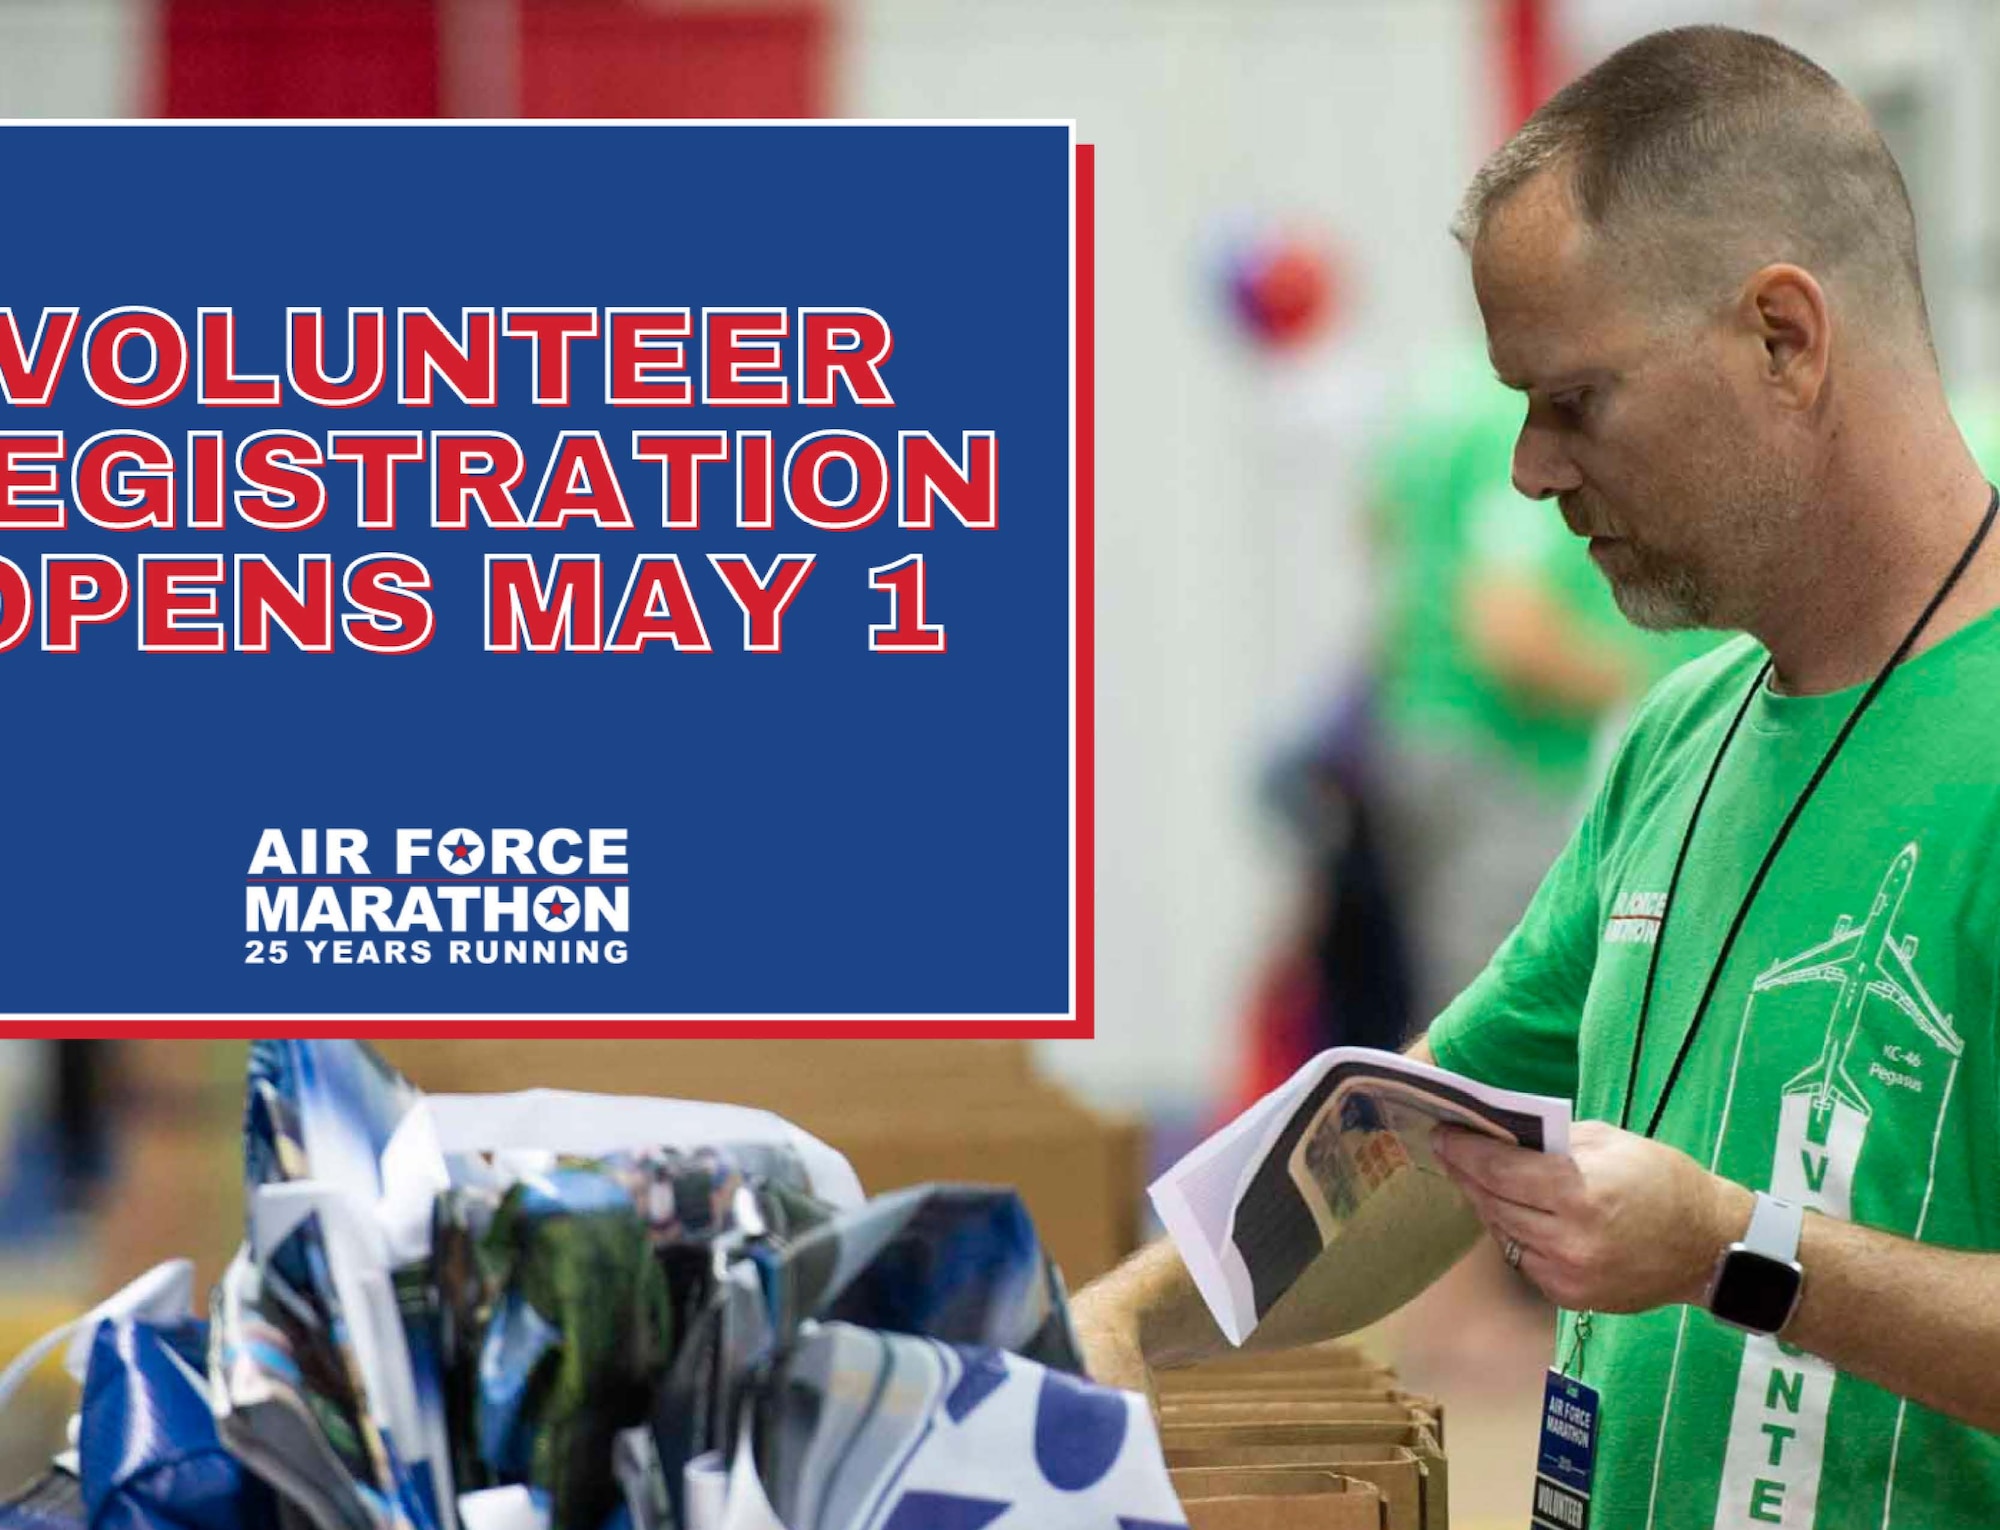 Officials are in need of more than 2,400 volunteers to assist in various marathon positions ranging from Health & Fitness Expo on Sept 16-17 to race day Sept 18, and even post-race on Sept 19.